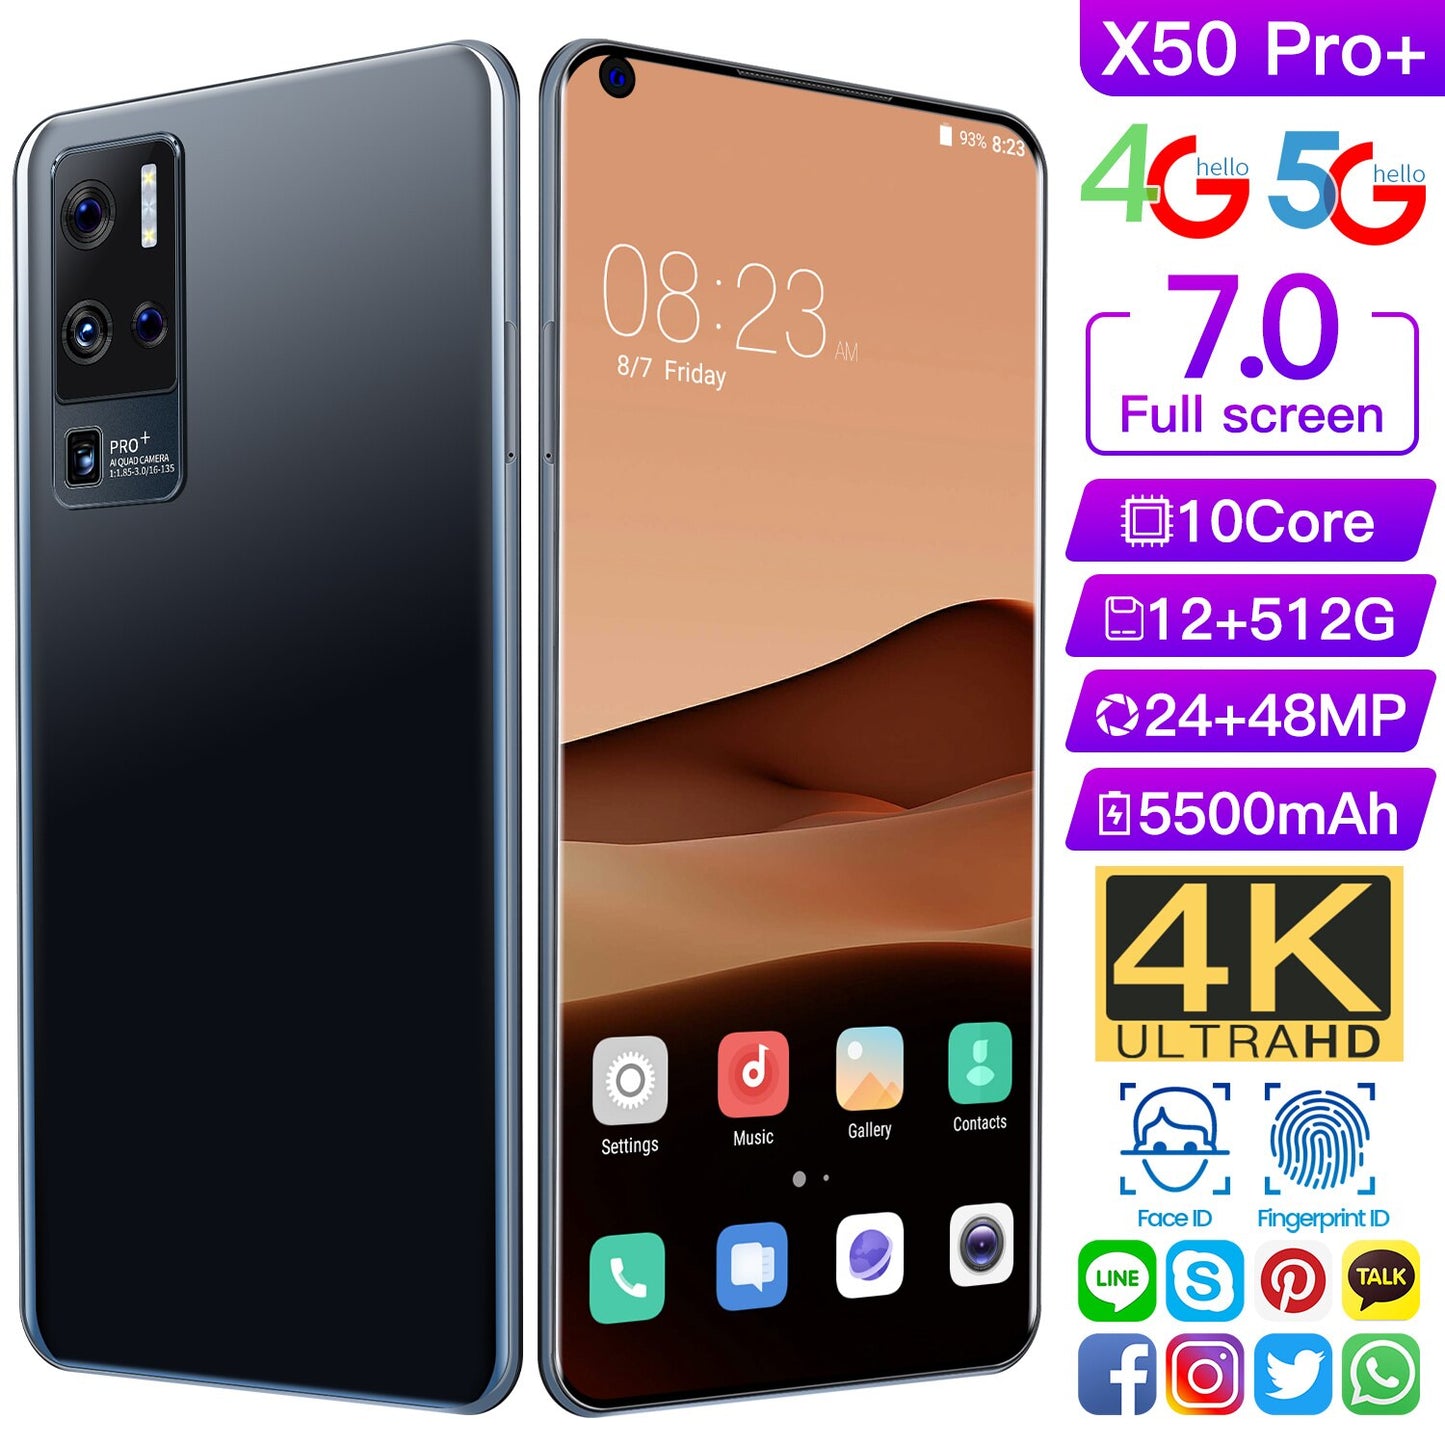 New Global Version for Vivo X50 Pro+ 7.0 Inch Screen 5G Smartphone with 12GB+512GB Large Memory Cellphone Samsung Mobile Phone